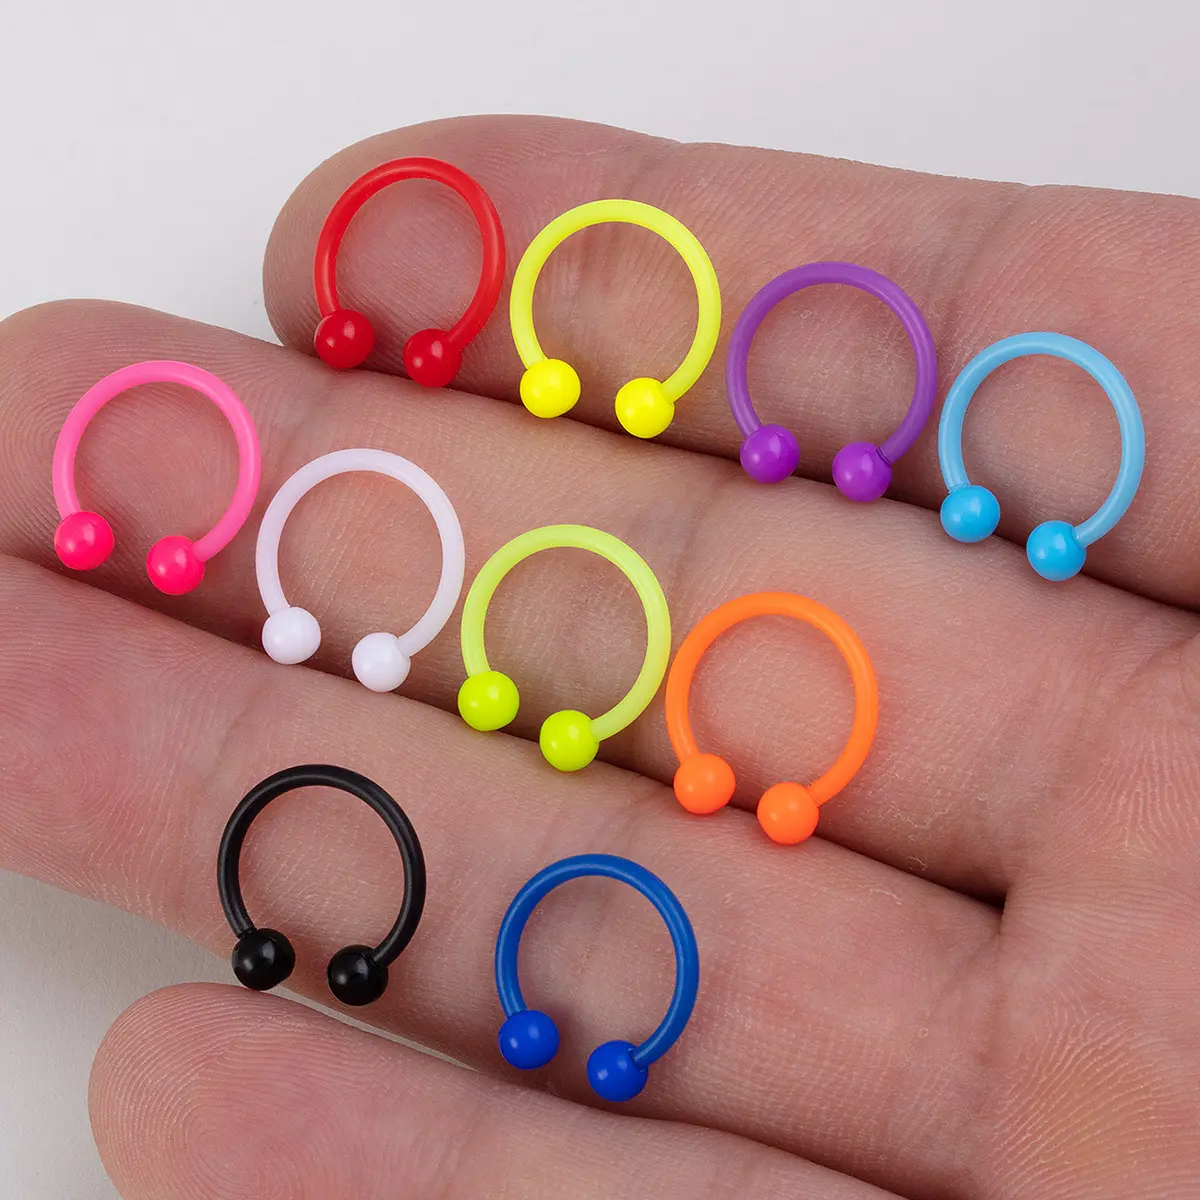 2401 new solid color horseshoe talk nose ring set 10 pieces of circular ears wholesale